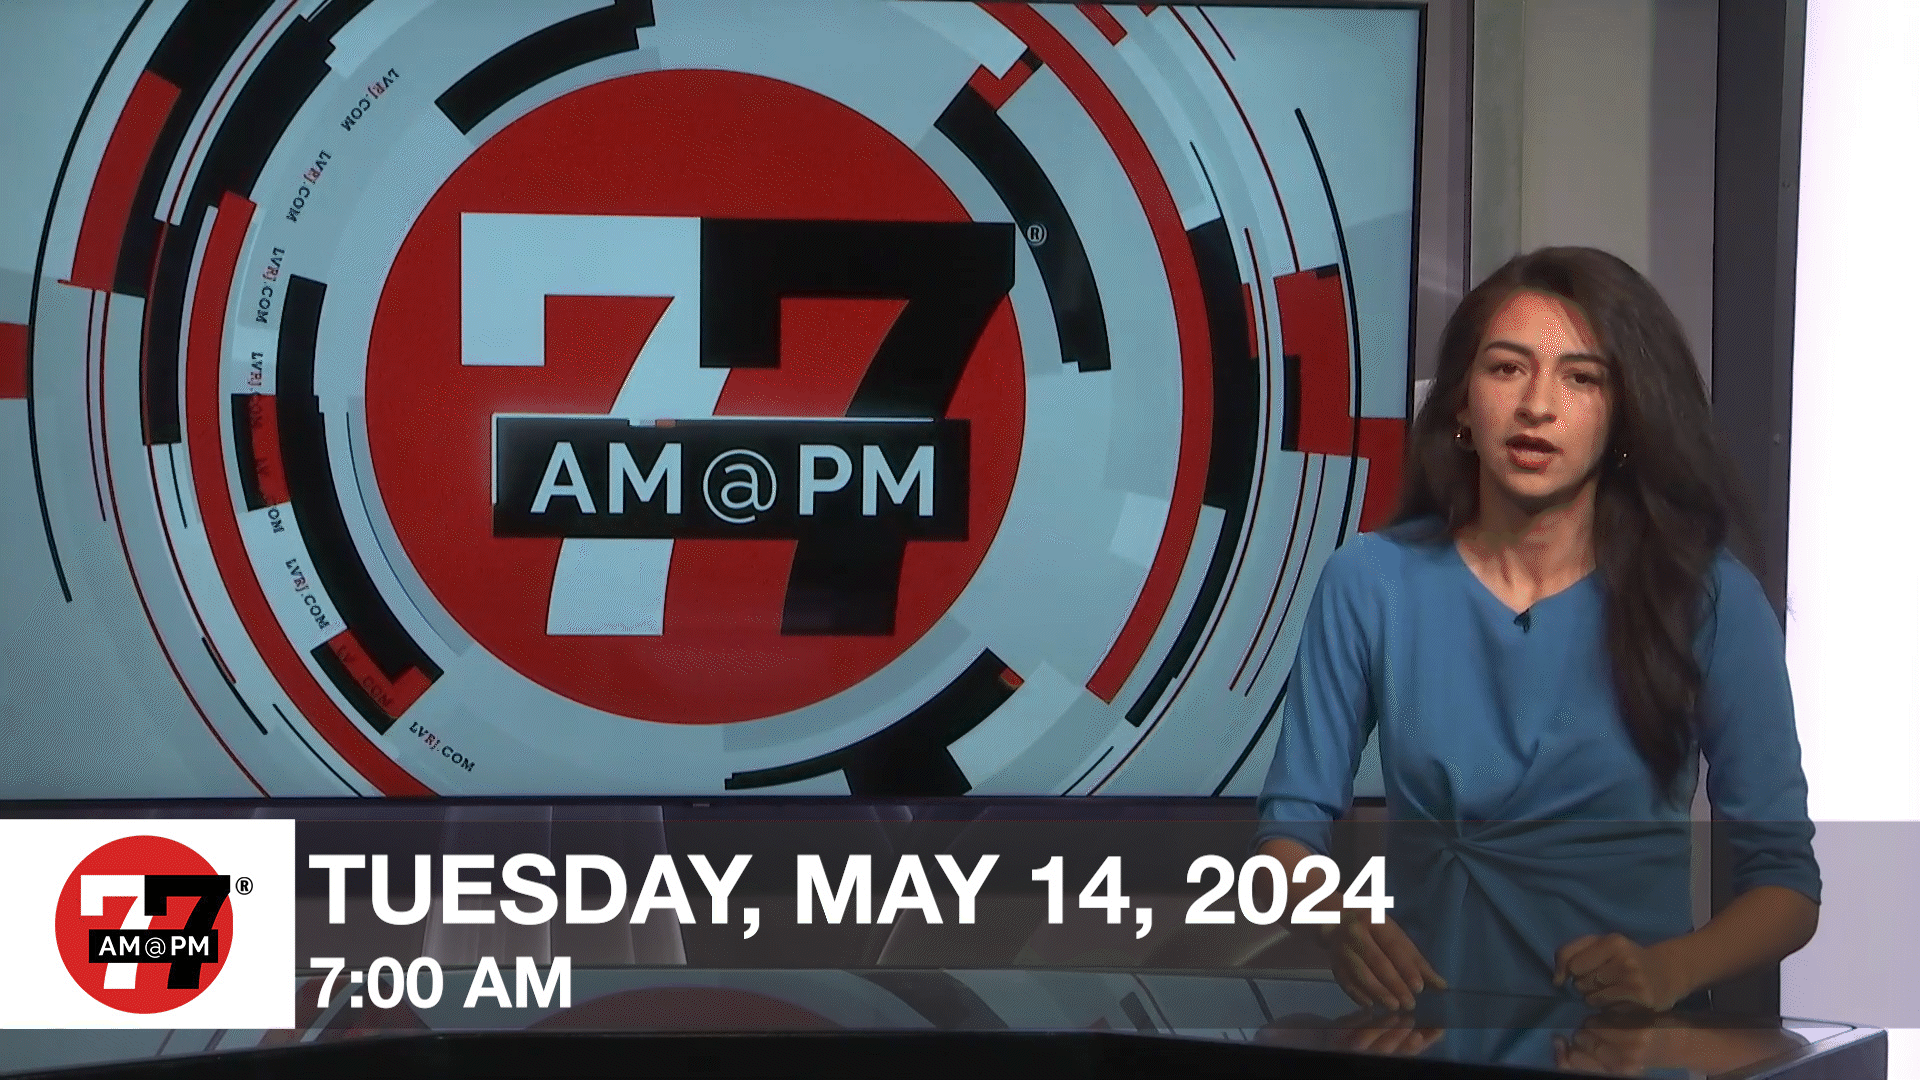 7@7 AM for Tuesday, May 14, 2024